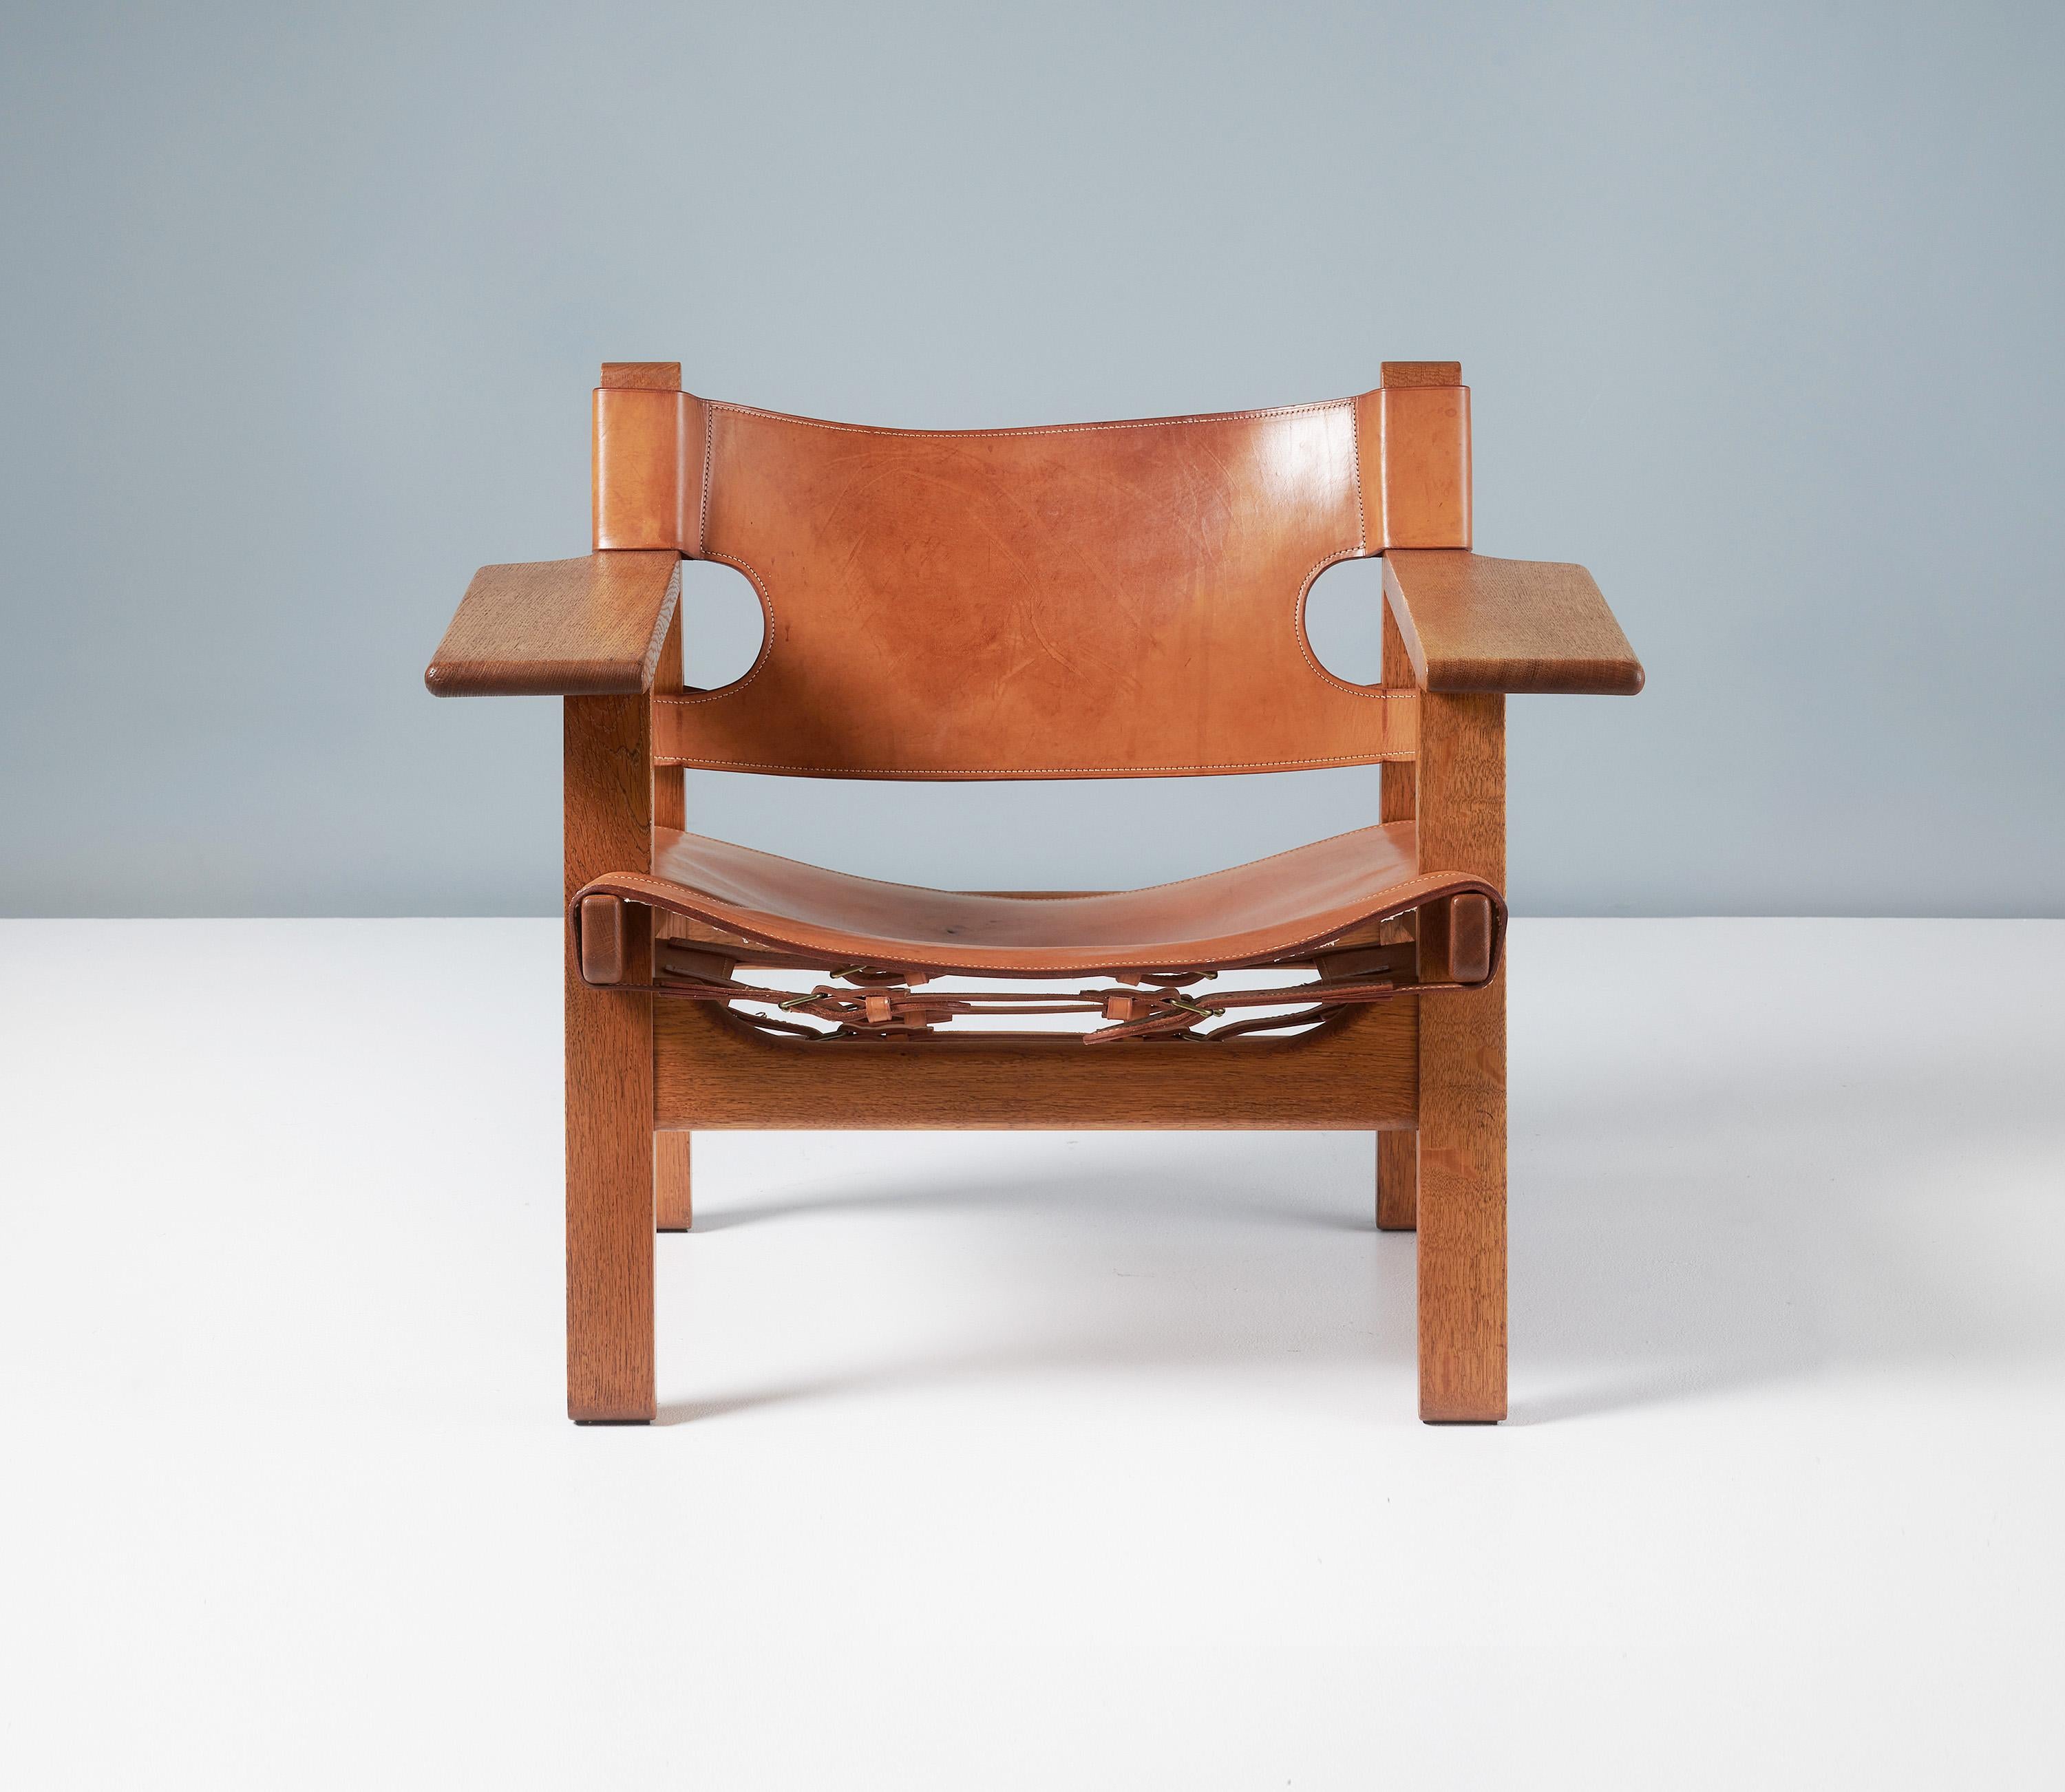 Børge Mogensen - The Spanish Chair, c1958

Manufactured by Fredericia Stolefabrik, Copenhagen, Denmark. Beautifully patinated and aged oak frame with original, patinated tan saddle leather seat and back and brass fittings. This wonderful early